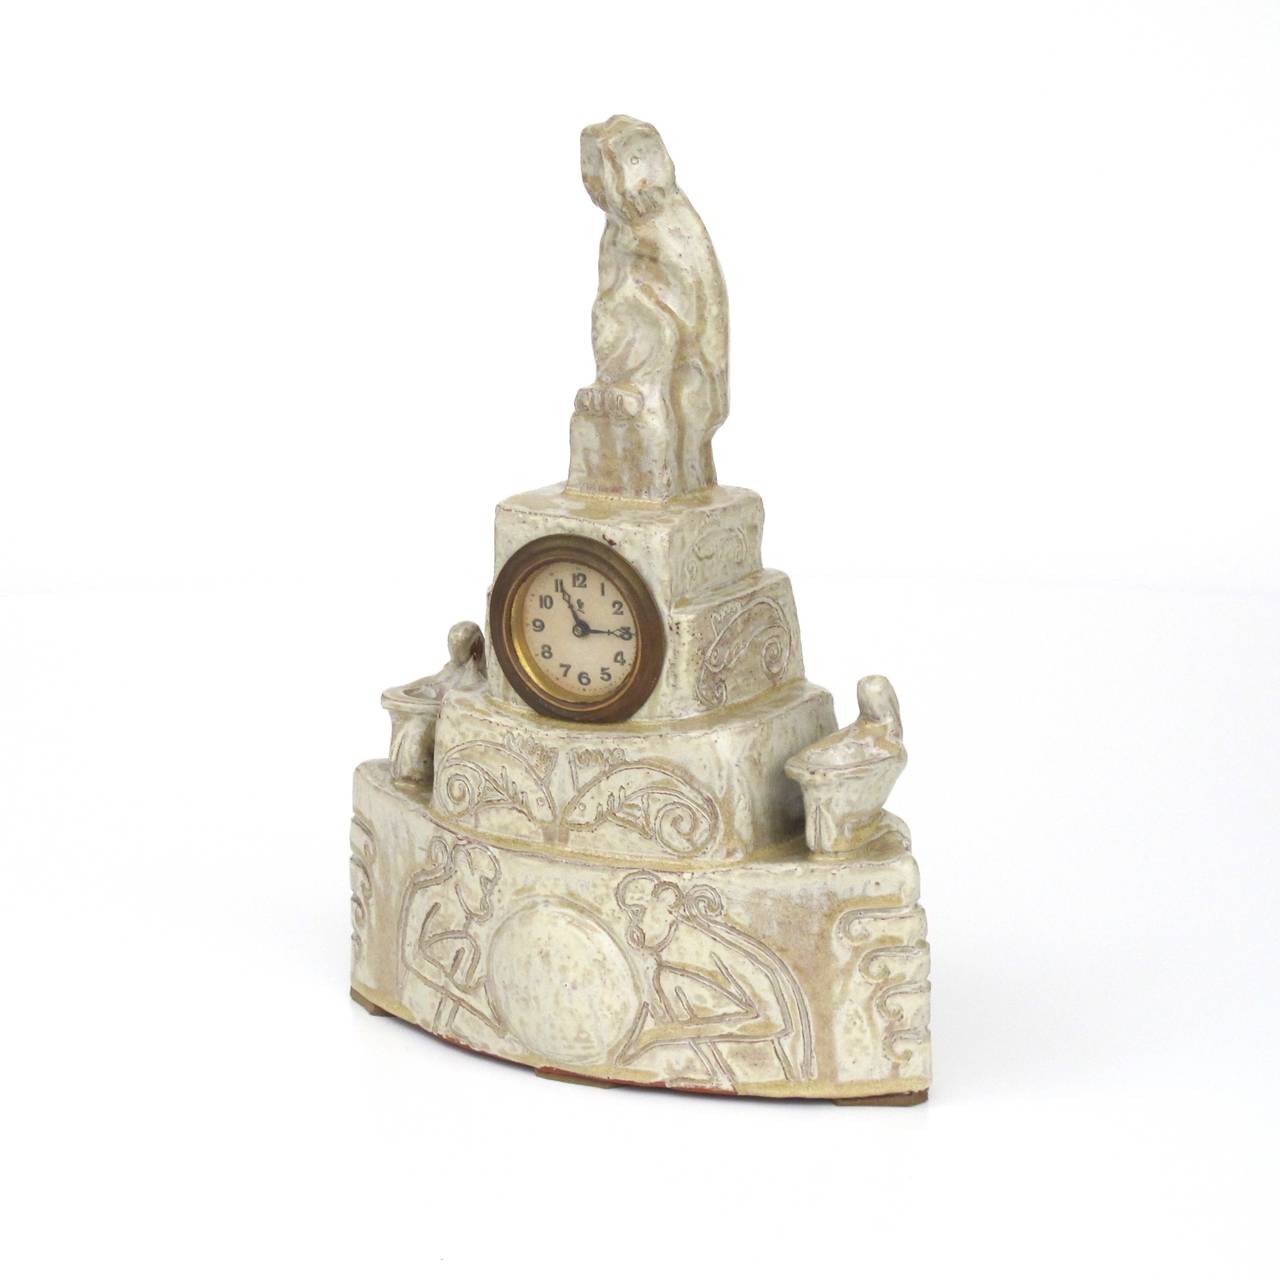 Intriguing Ceramic Mantle Clock, made by Cris Agterberg in his own workshop. The clock depicts sitting apes and typical Agterberg-fish with curls, is flanked by two fantastical figures and crowned by a sitting owl. The clock is in a good condition